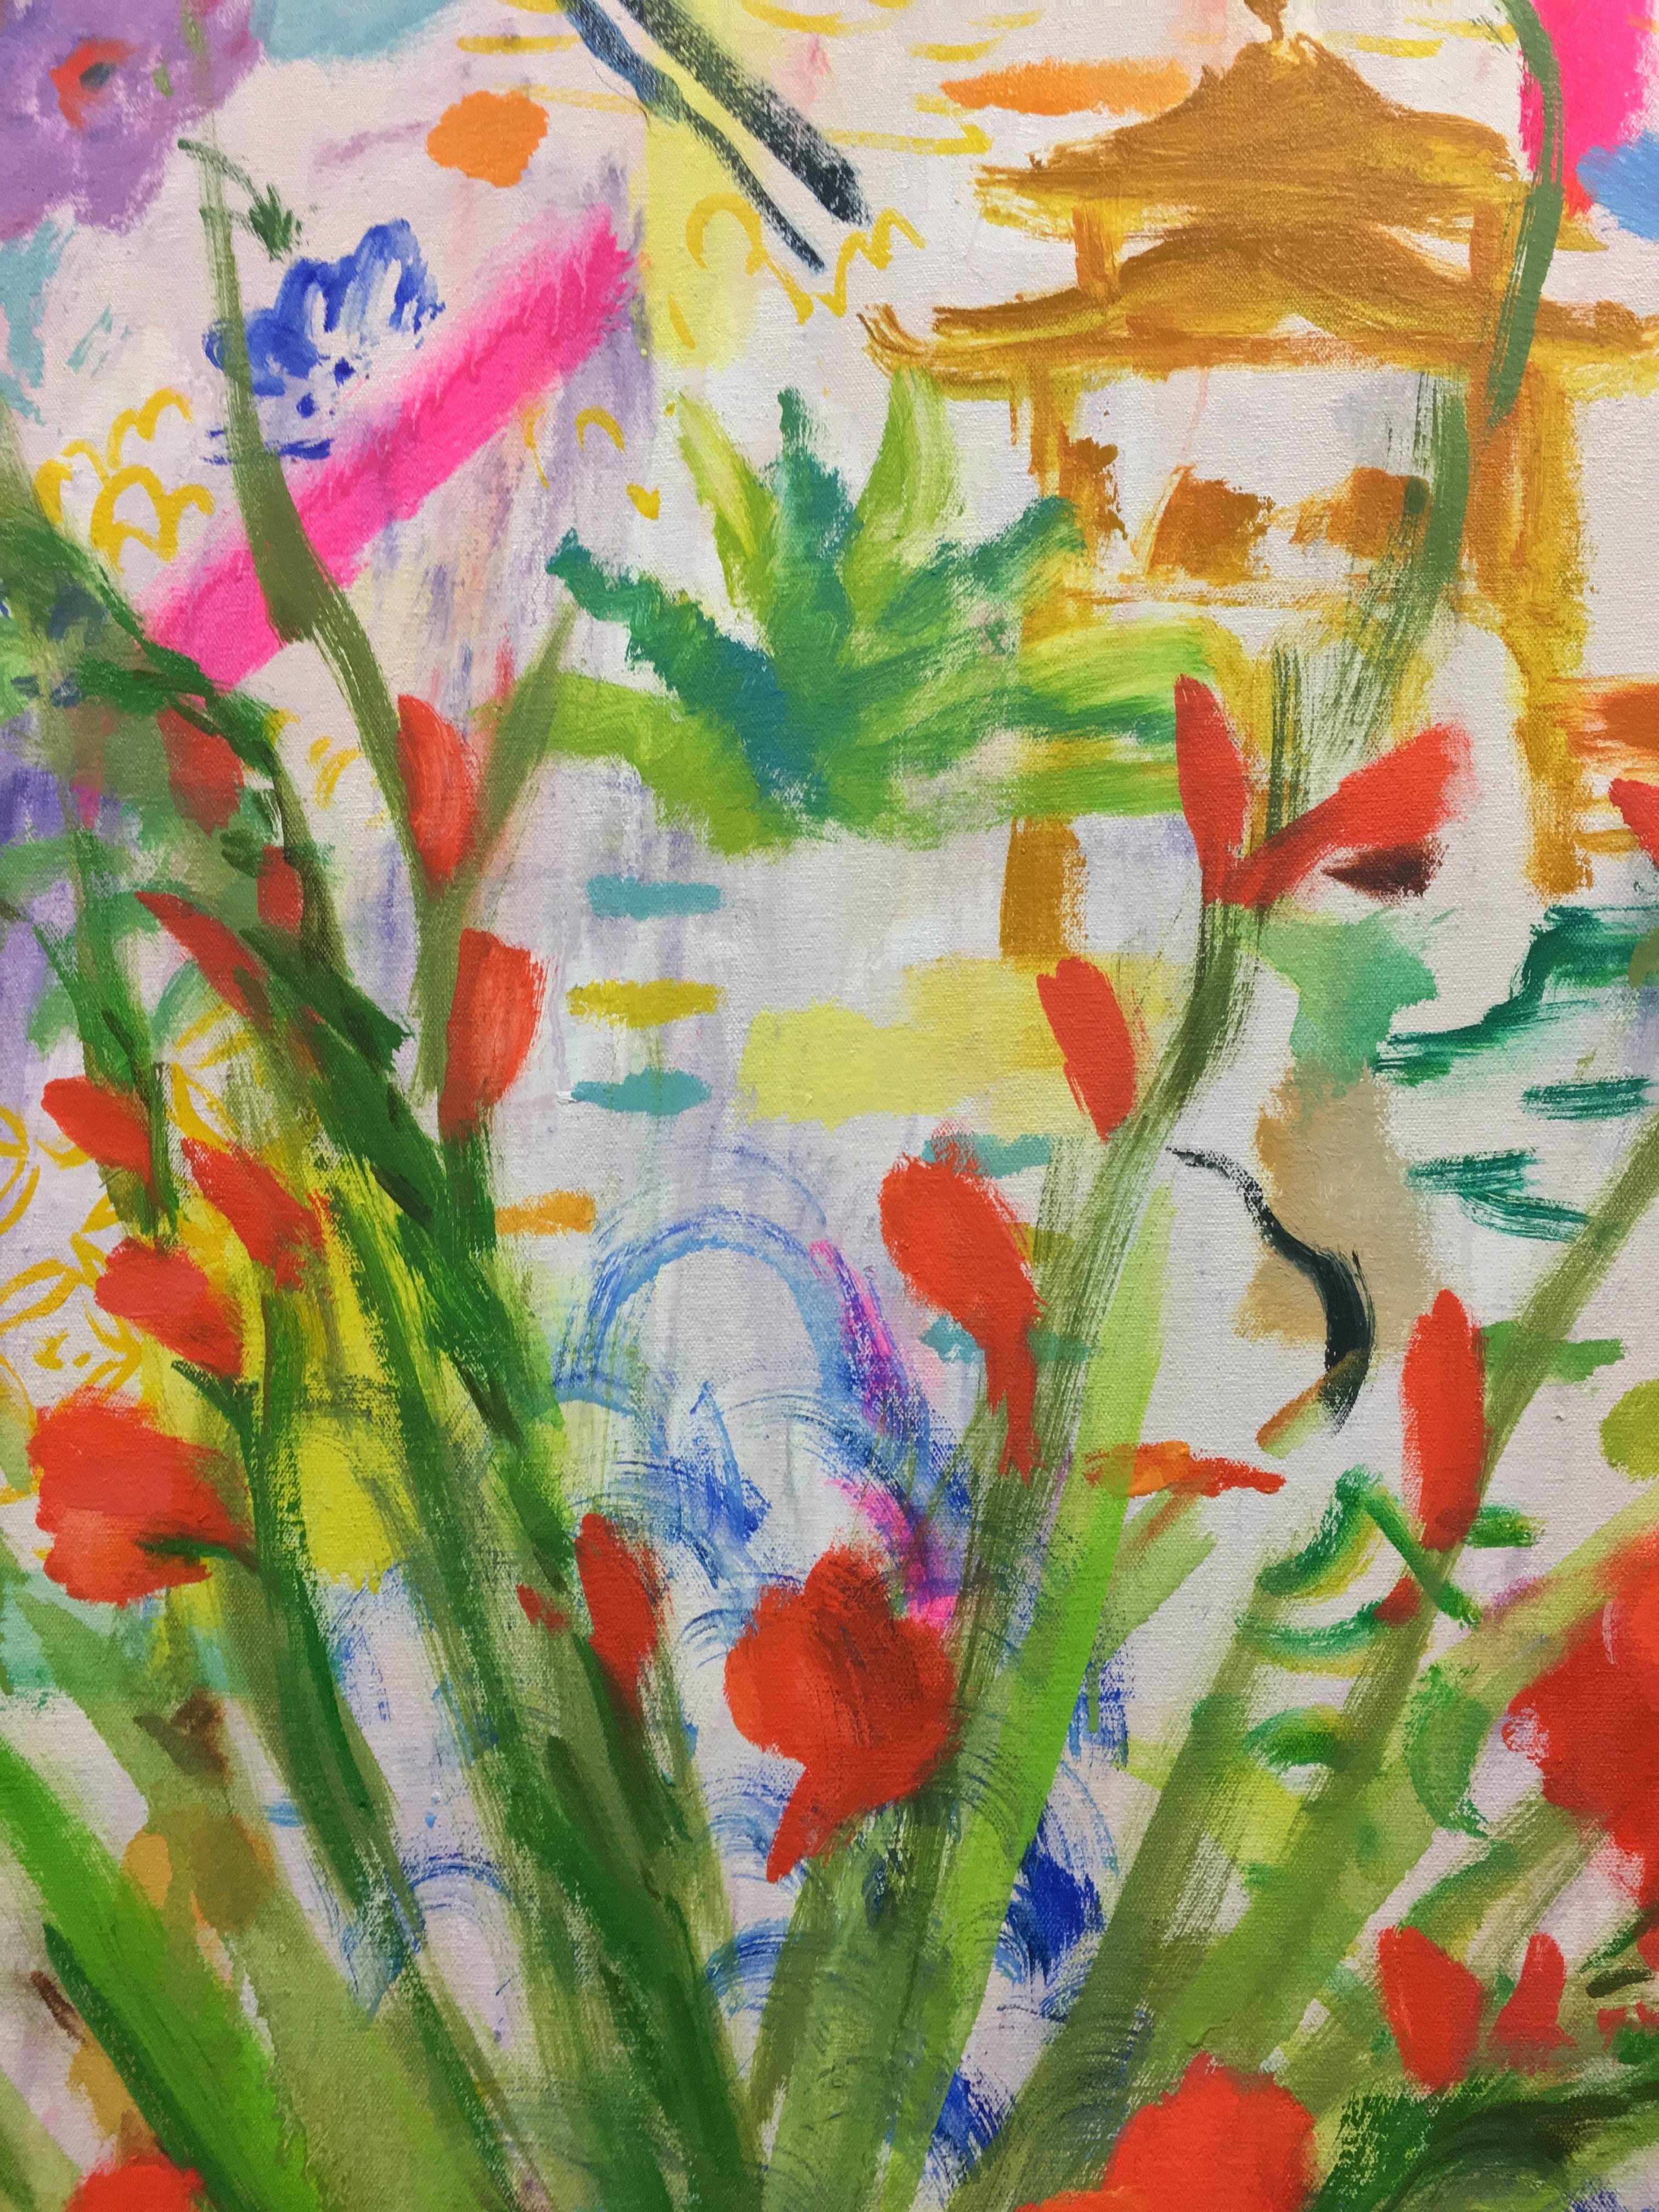 Glads, Multicolored Interior with Bouquet of Gladiolas in Orange, Blue, White  - Beige Still-Life Painting by Melanie Parke